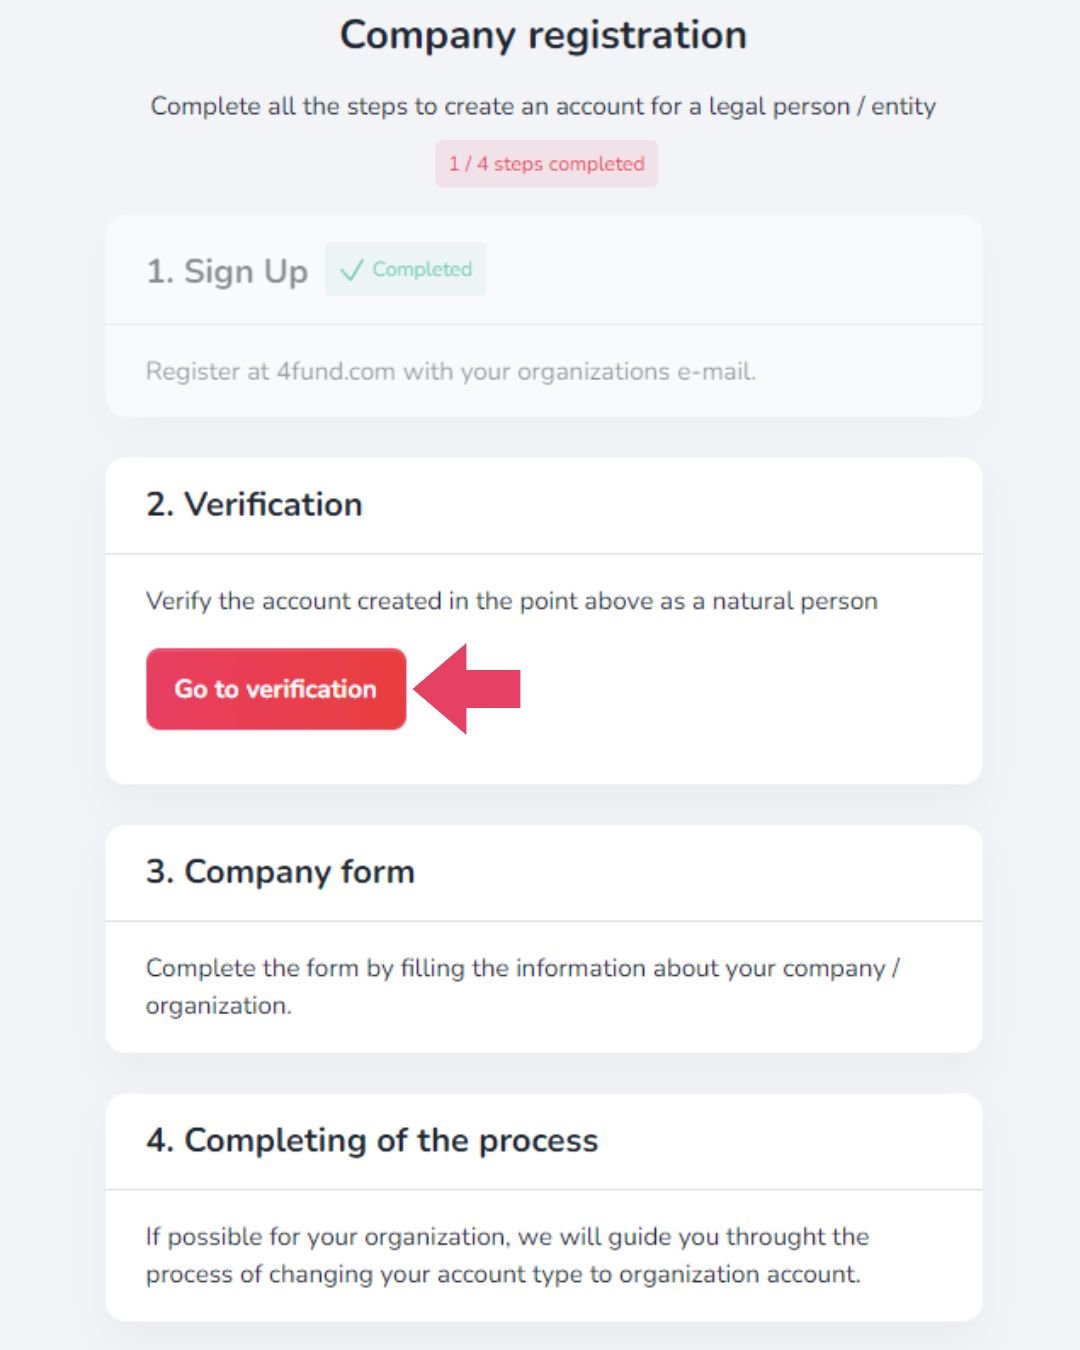 The screenshot shows the second step of the account registration process - verification.